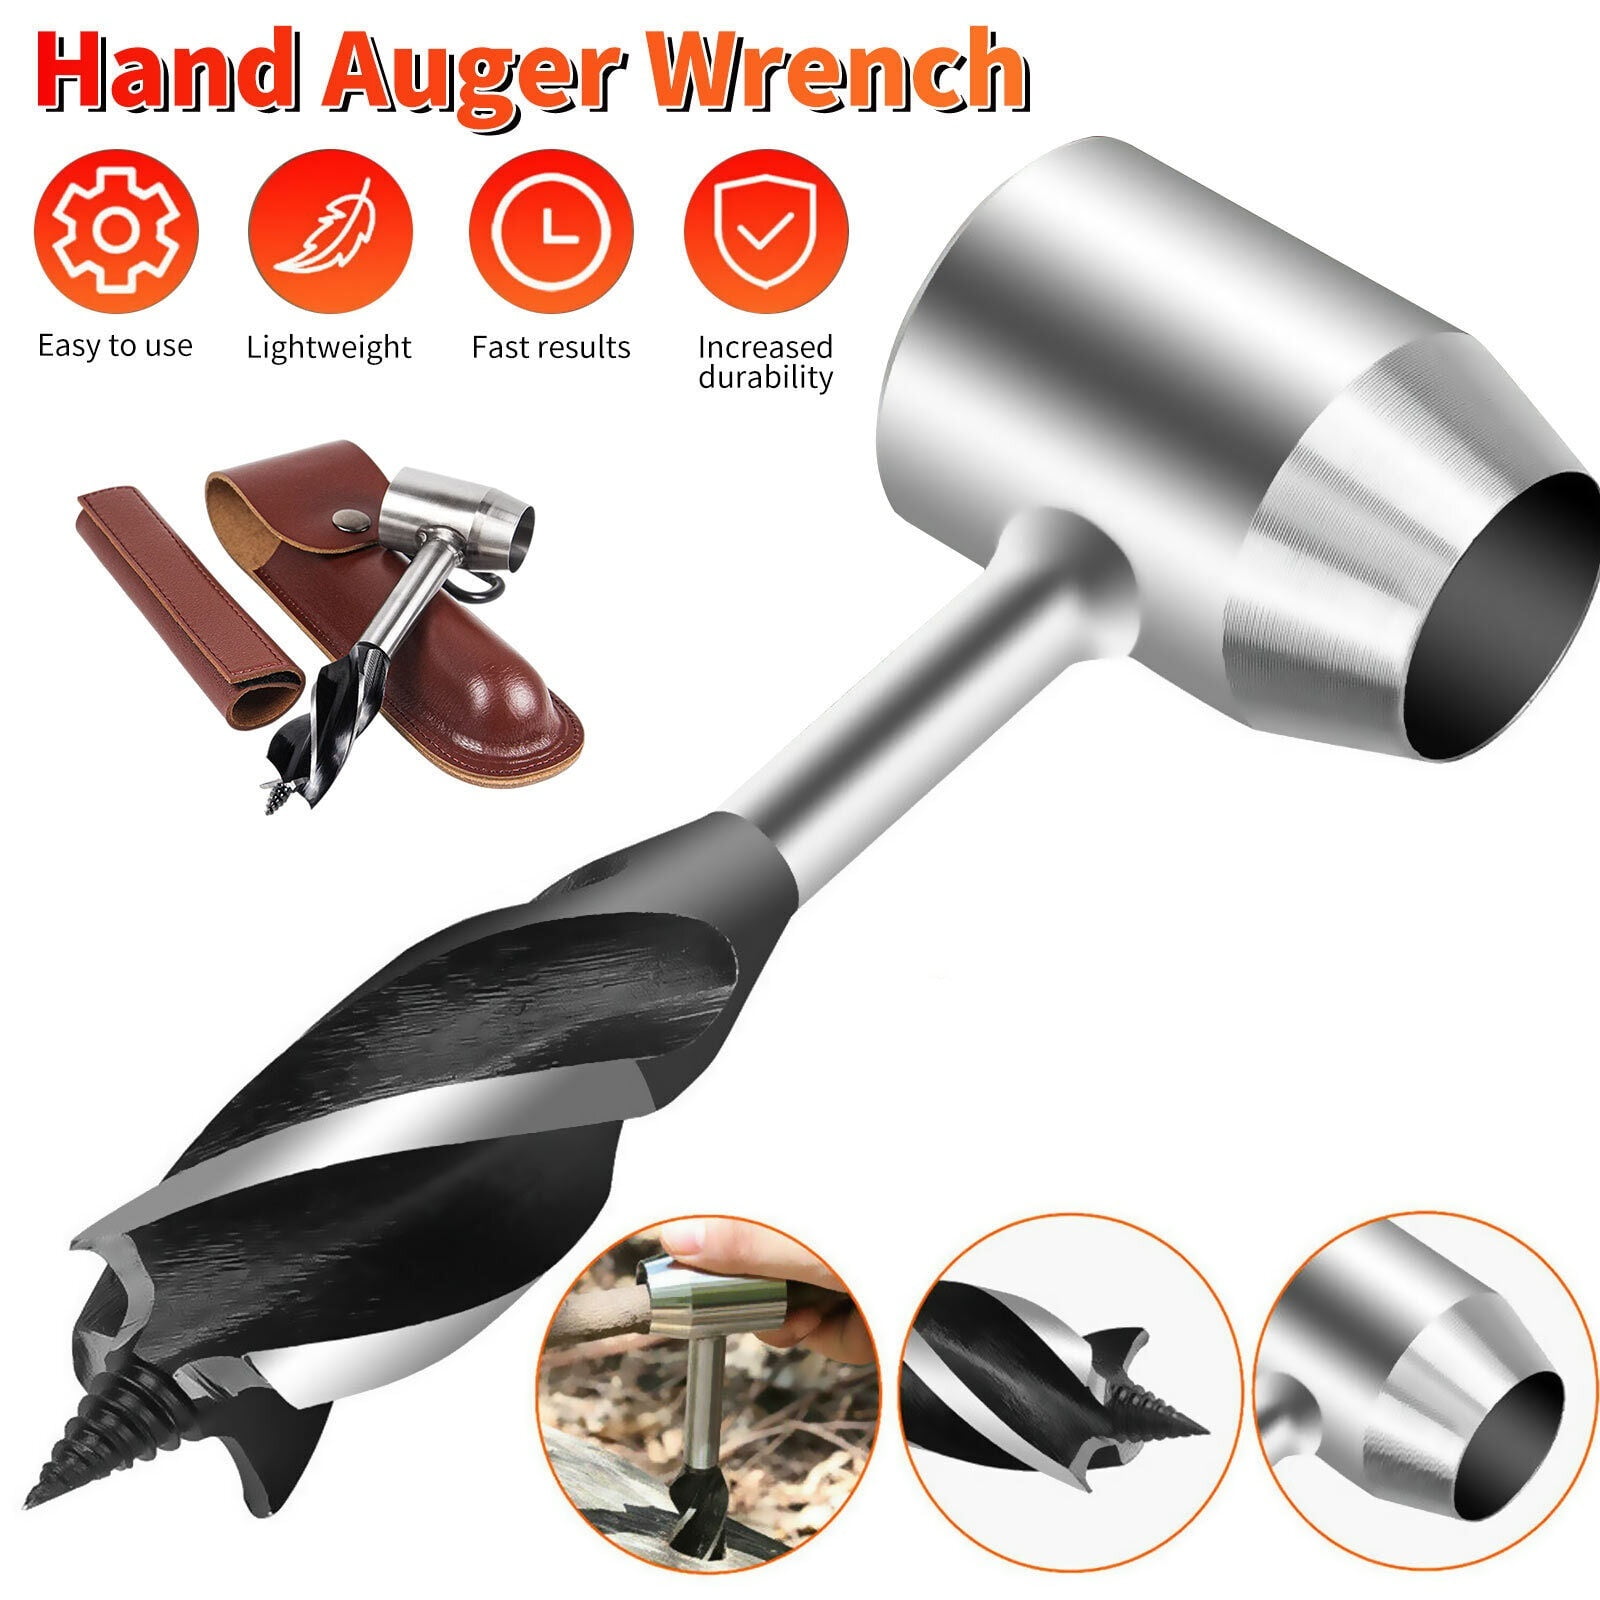 WESSLECO Hand Wrench Auger Drill Bit, Bushcraft Tools for Survival